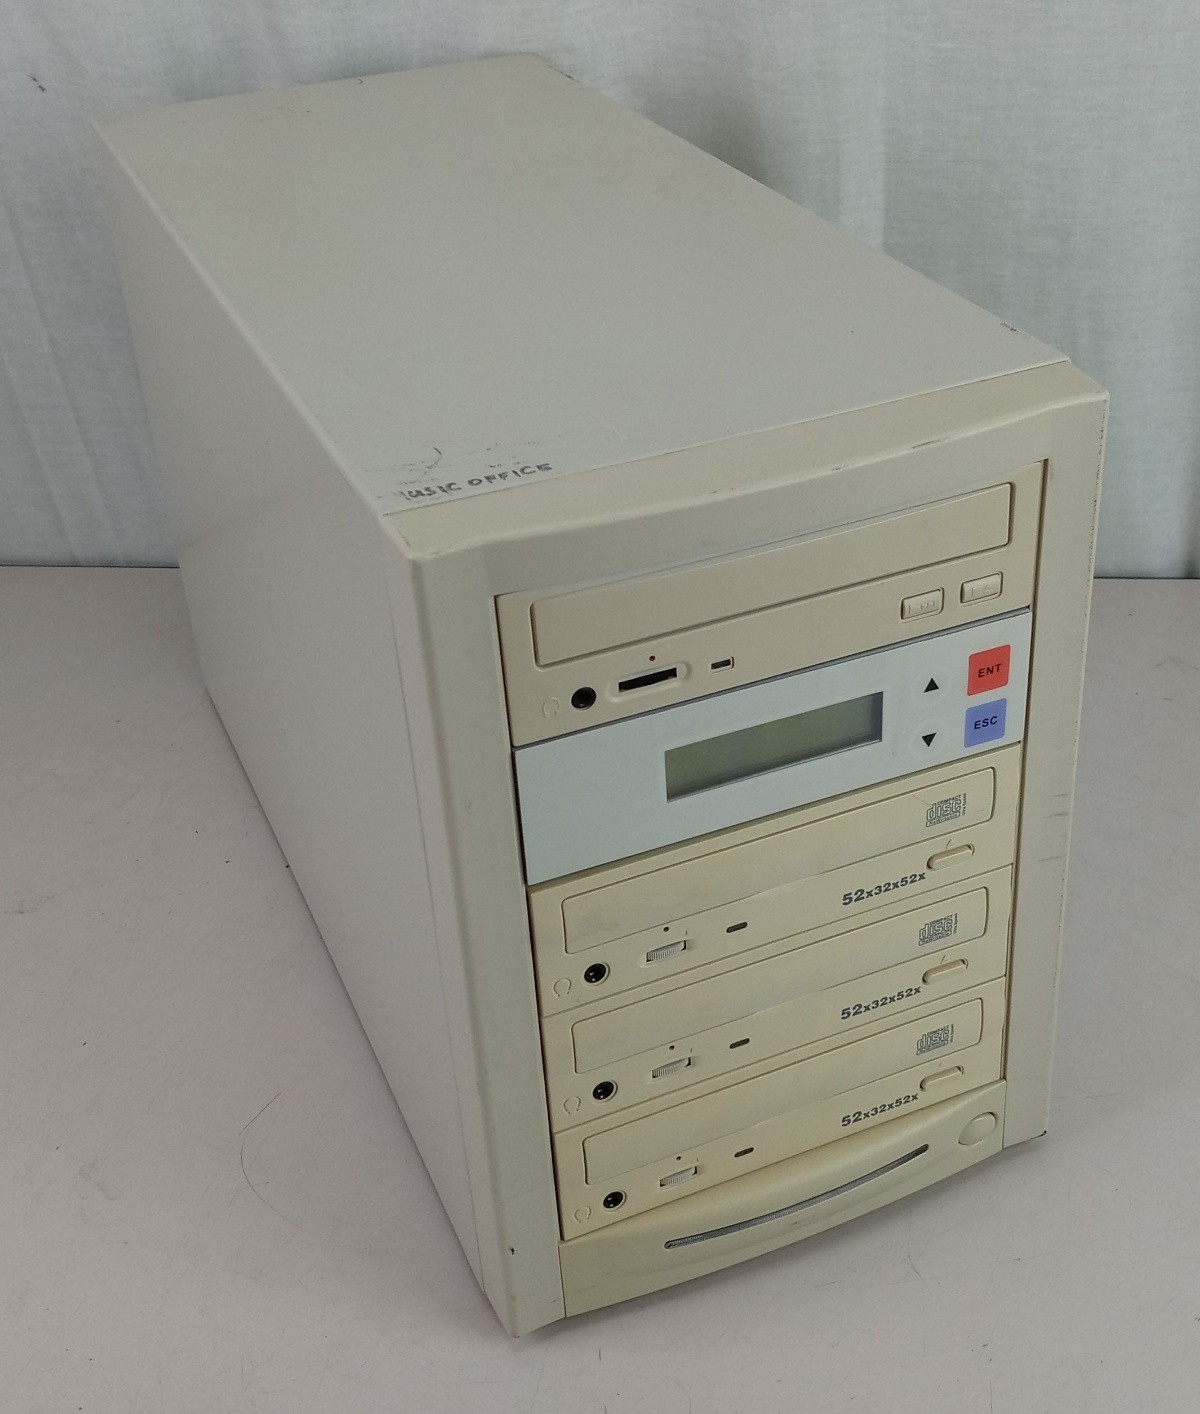 Unbranded 4x CD Disc Drive Duplicator - Tested